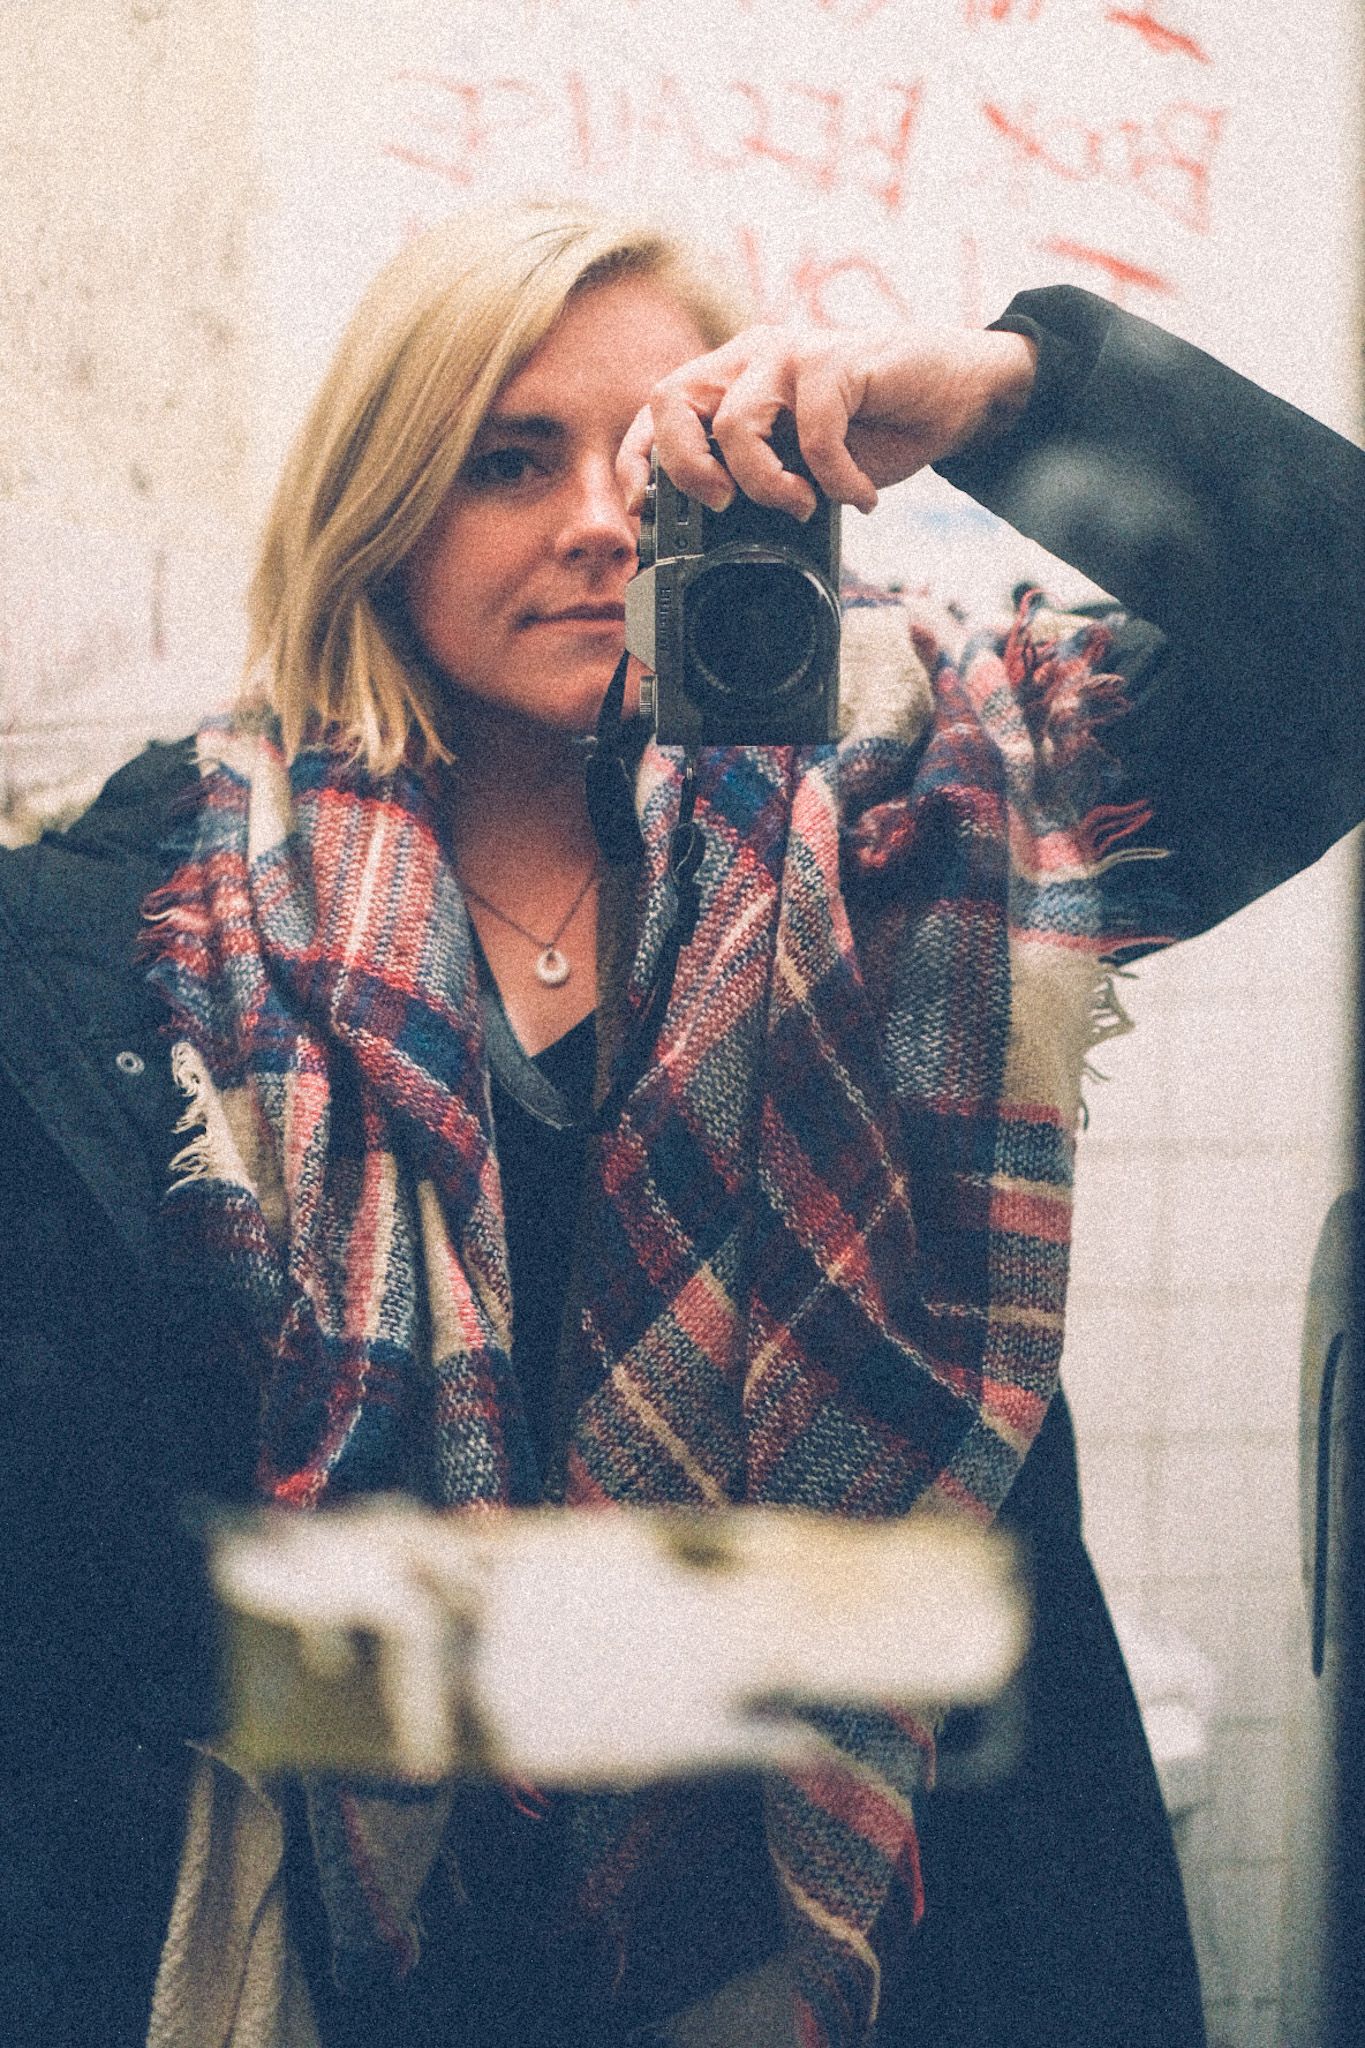 A self-portrait of a woman in a mirror hung on a dive bar bathroom. She is blond with a pink patterned scarf. The camera is out of focus in the reflection.